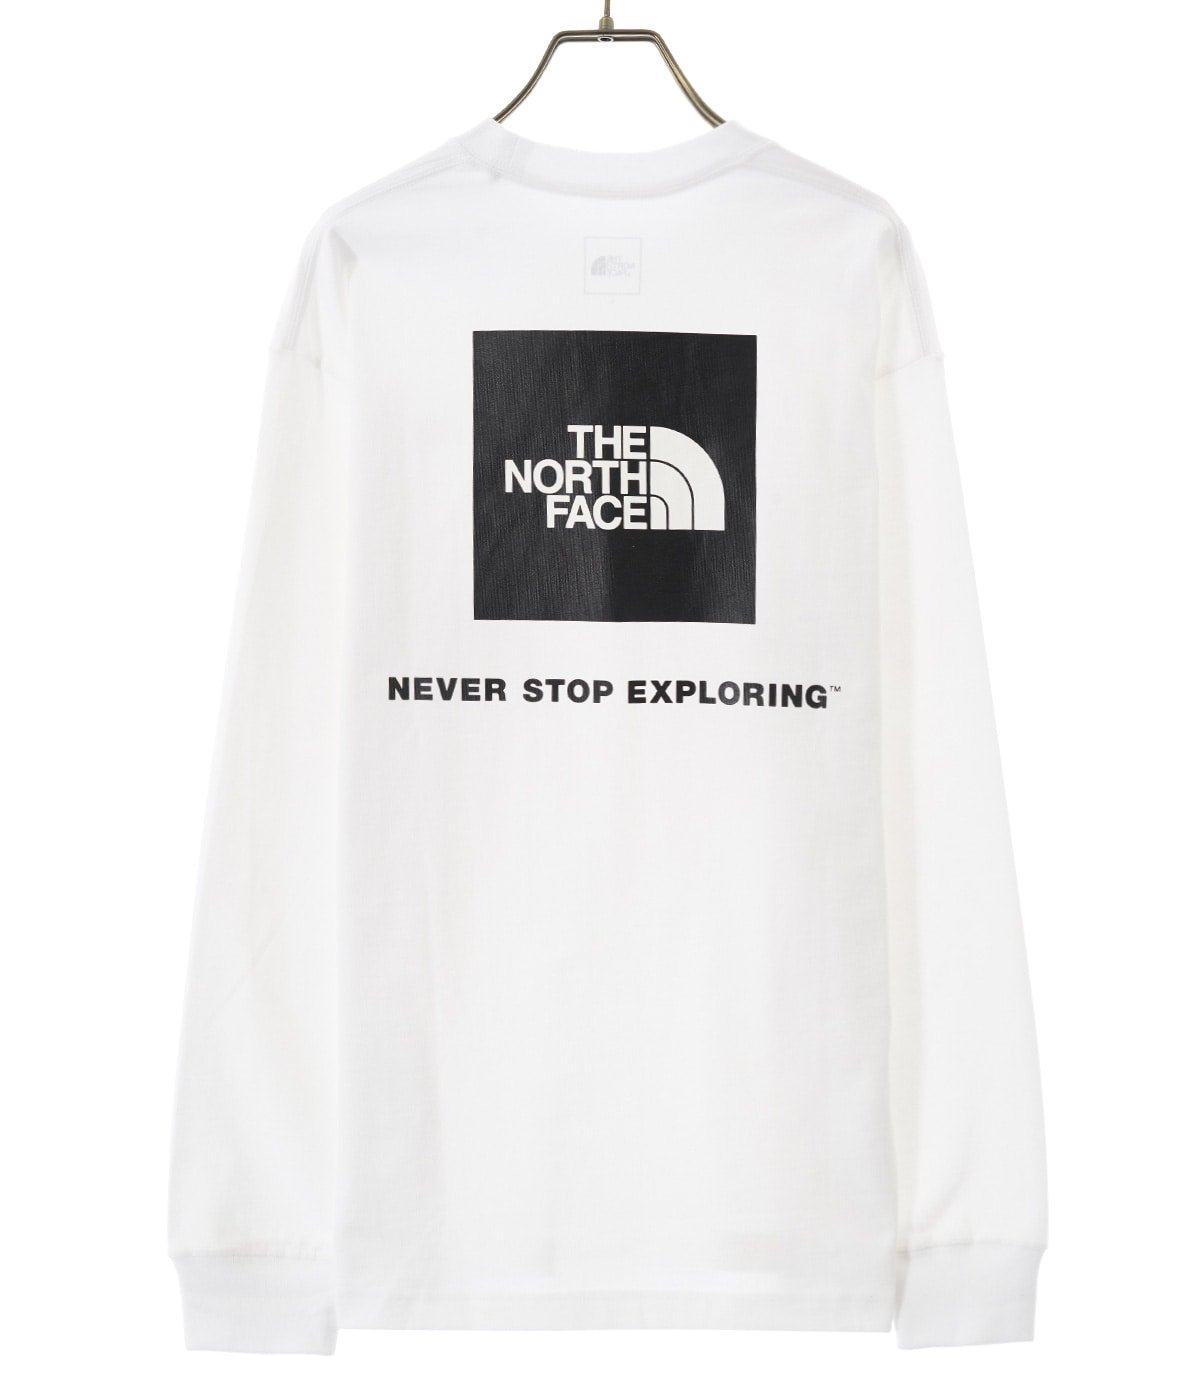 L/S Back Square Logo Tee | THE NORTH FACE(ザ ノースフェイス) / トップス カットソー長袖